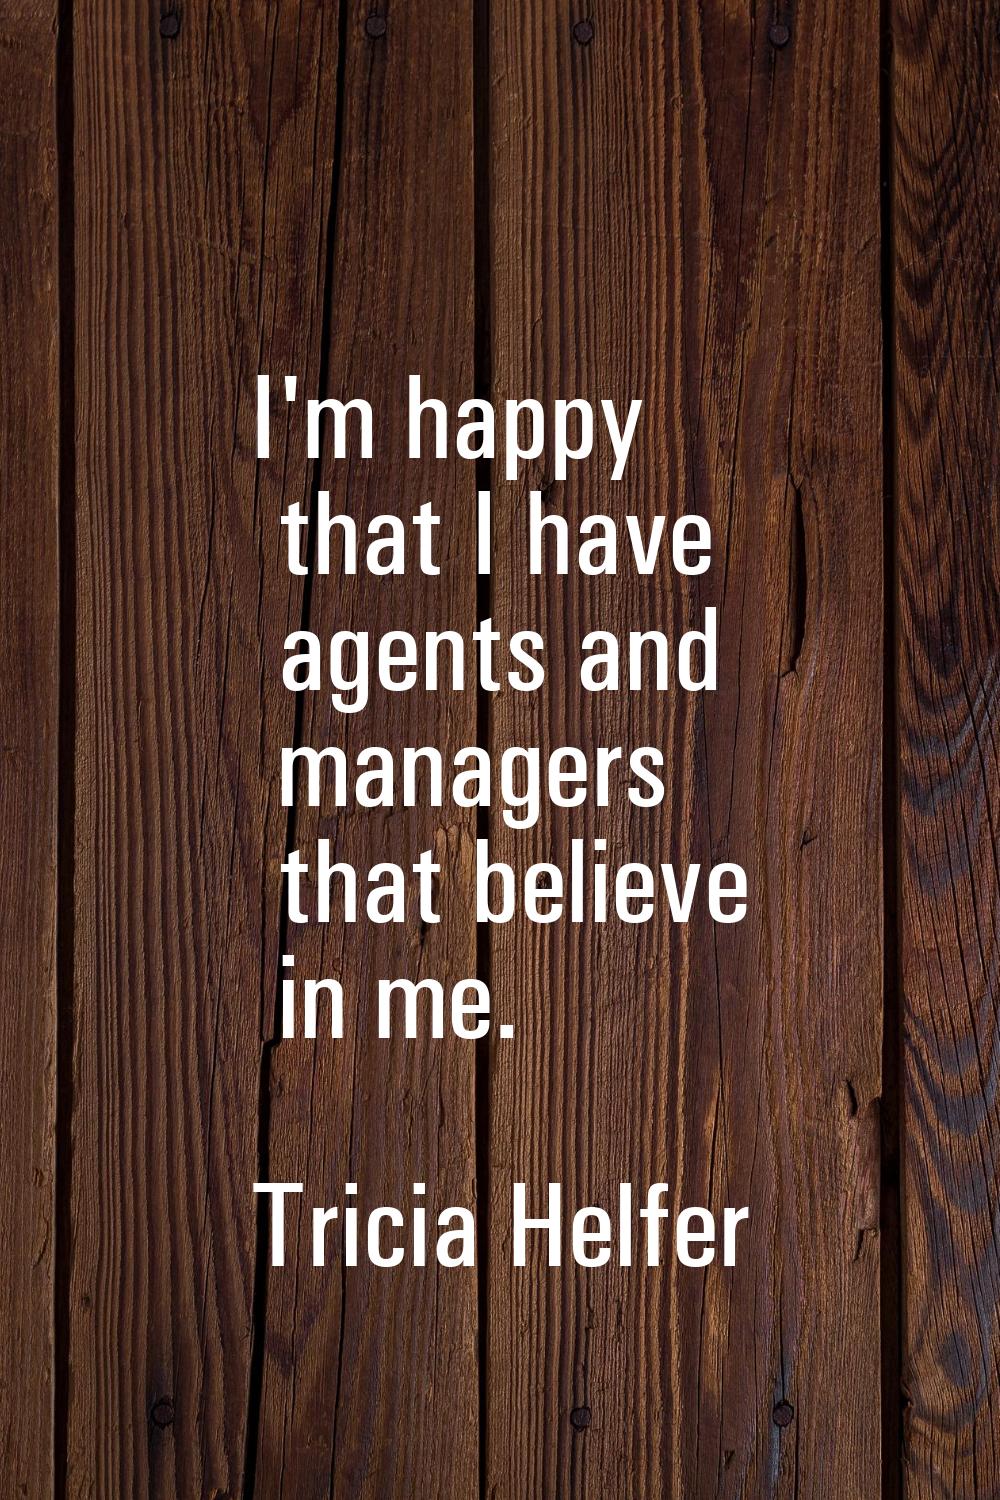 I'm happy that I have agents and managers that believe in me.